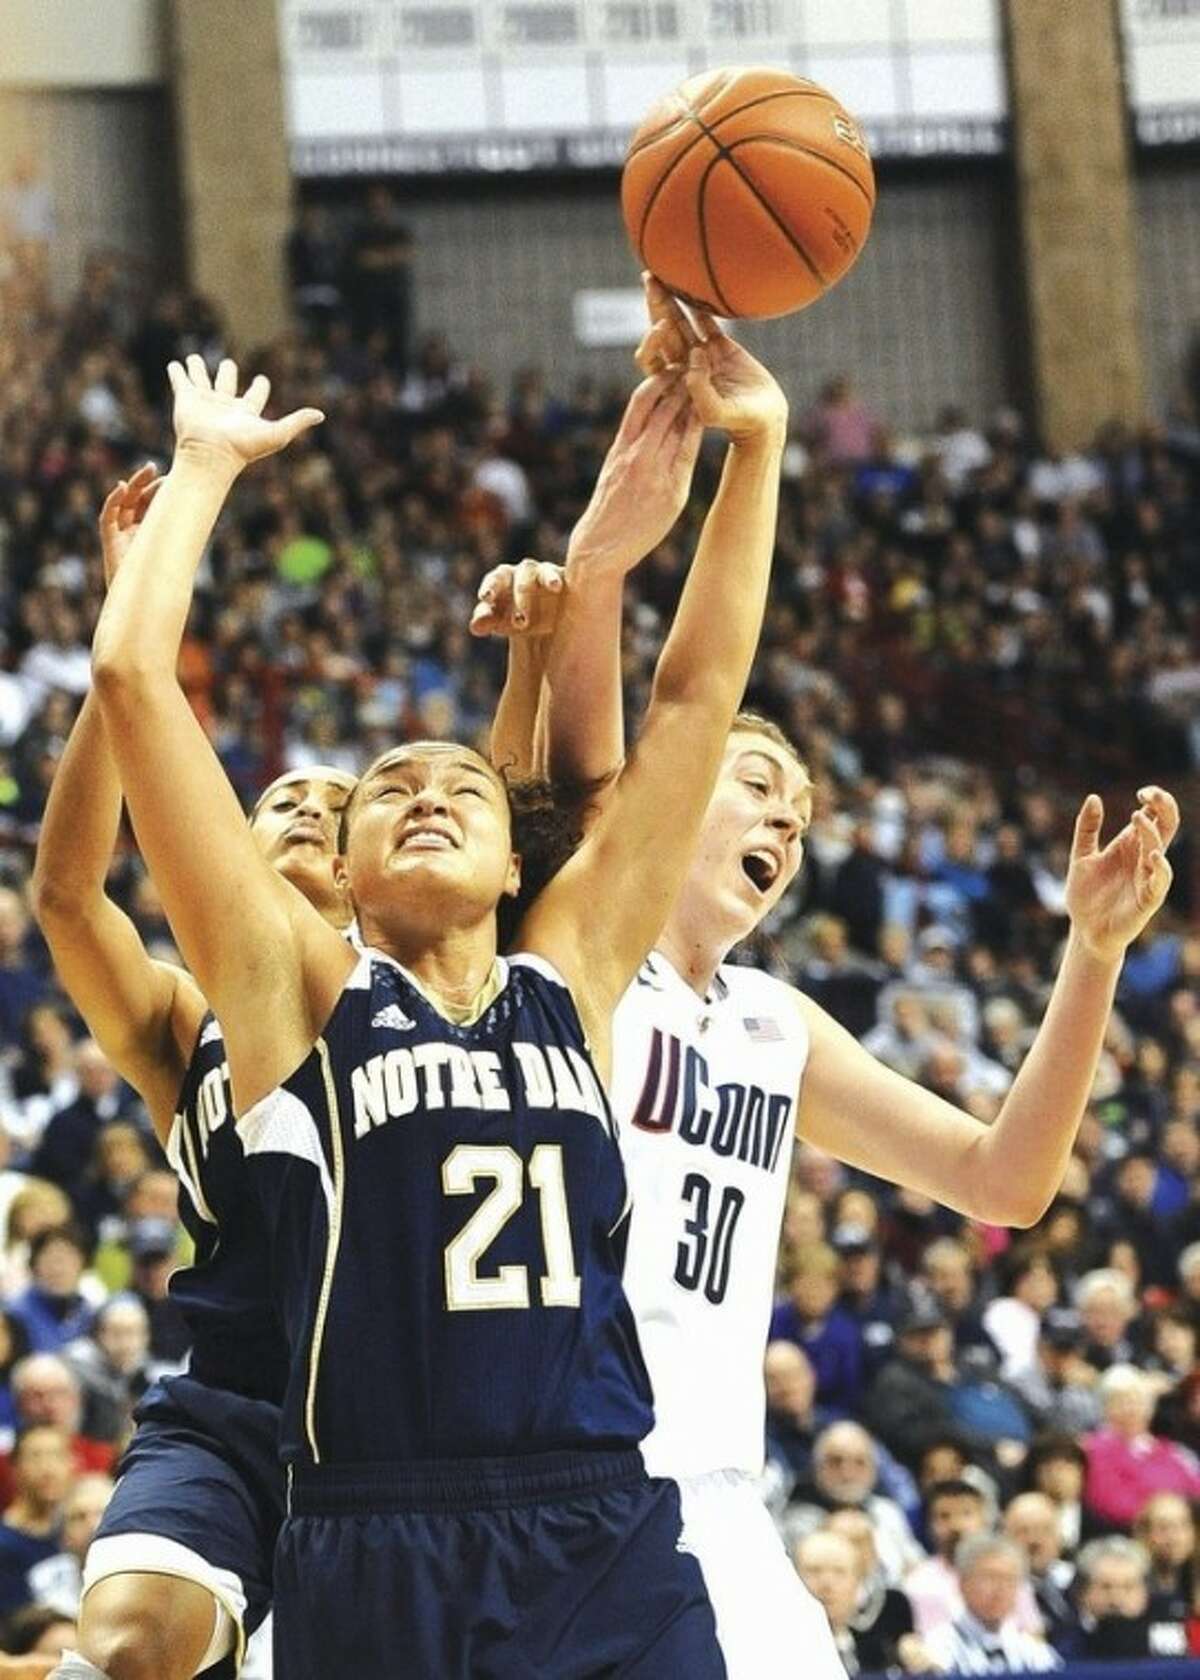 AP photo Notre Dame's Kayla McBride (21) and Skylar Diggins, back left, fight for possession of the ball against UConn's Breanna Stewart during the second half of Saturday's game at Gampel Pavilion. McBride and Diggins were top scorers for the fifth-ranked Irish with 21 and 19 points, respectively, in their 73-72 upset of No. 1 UConn.